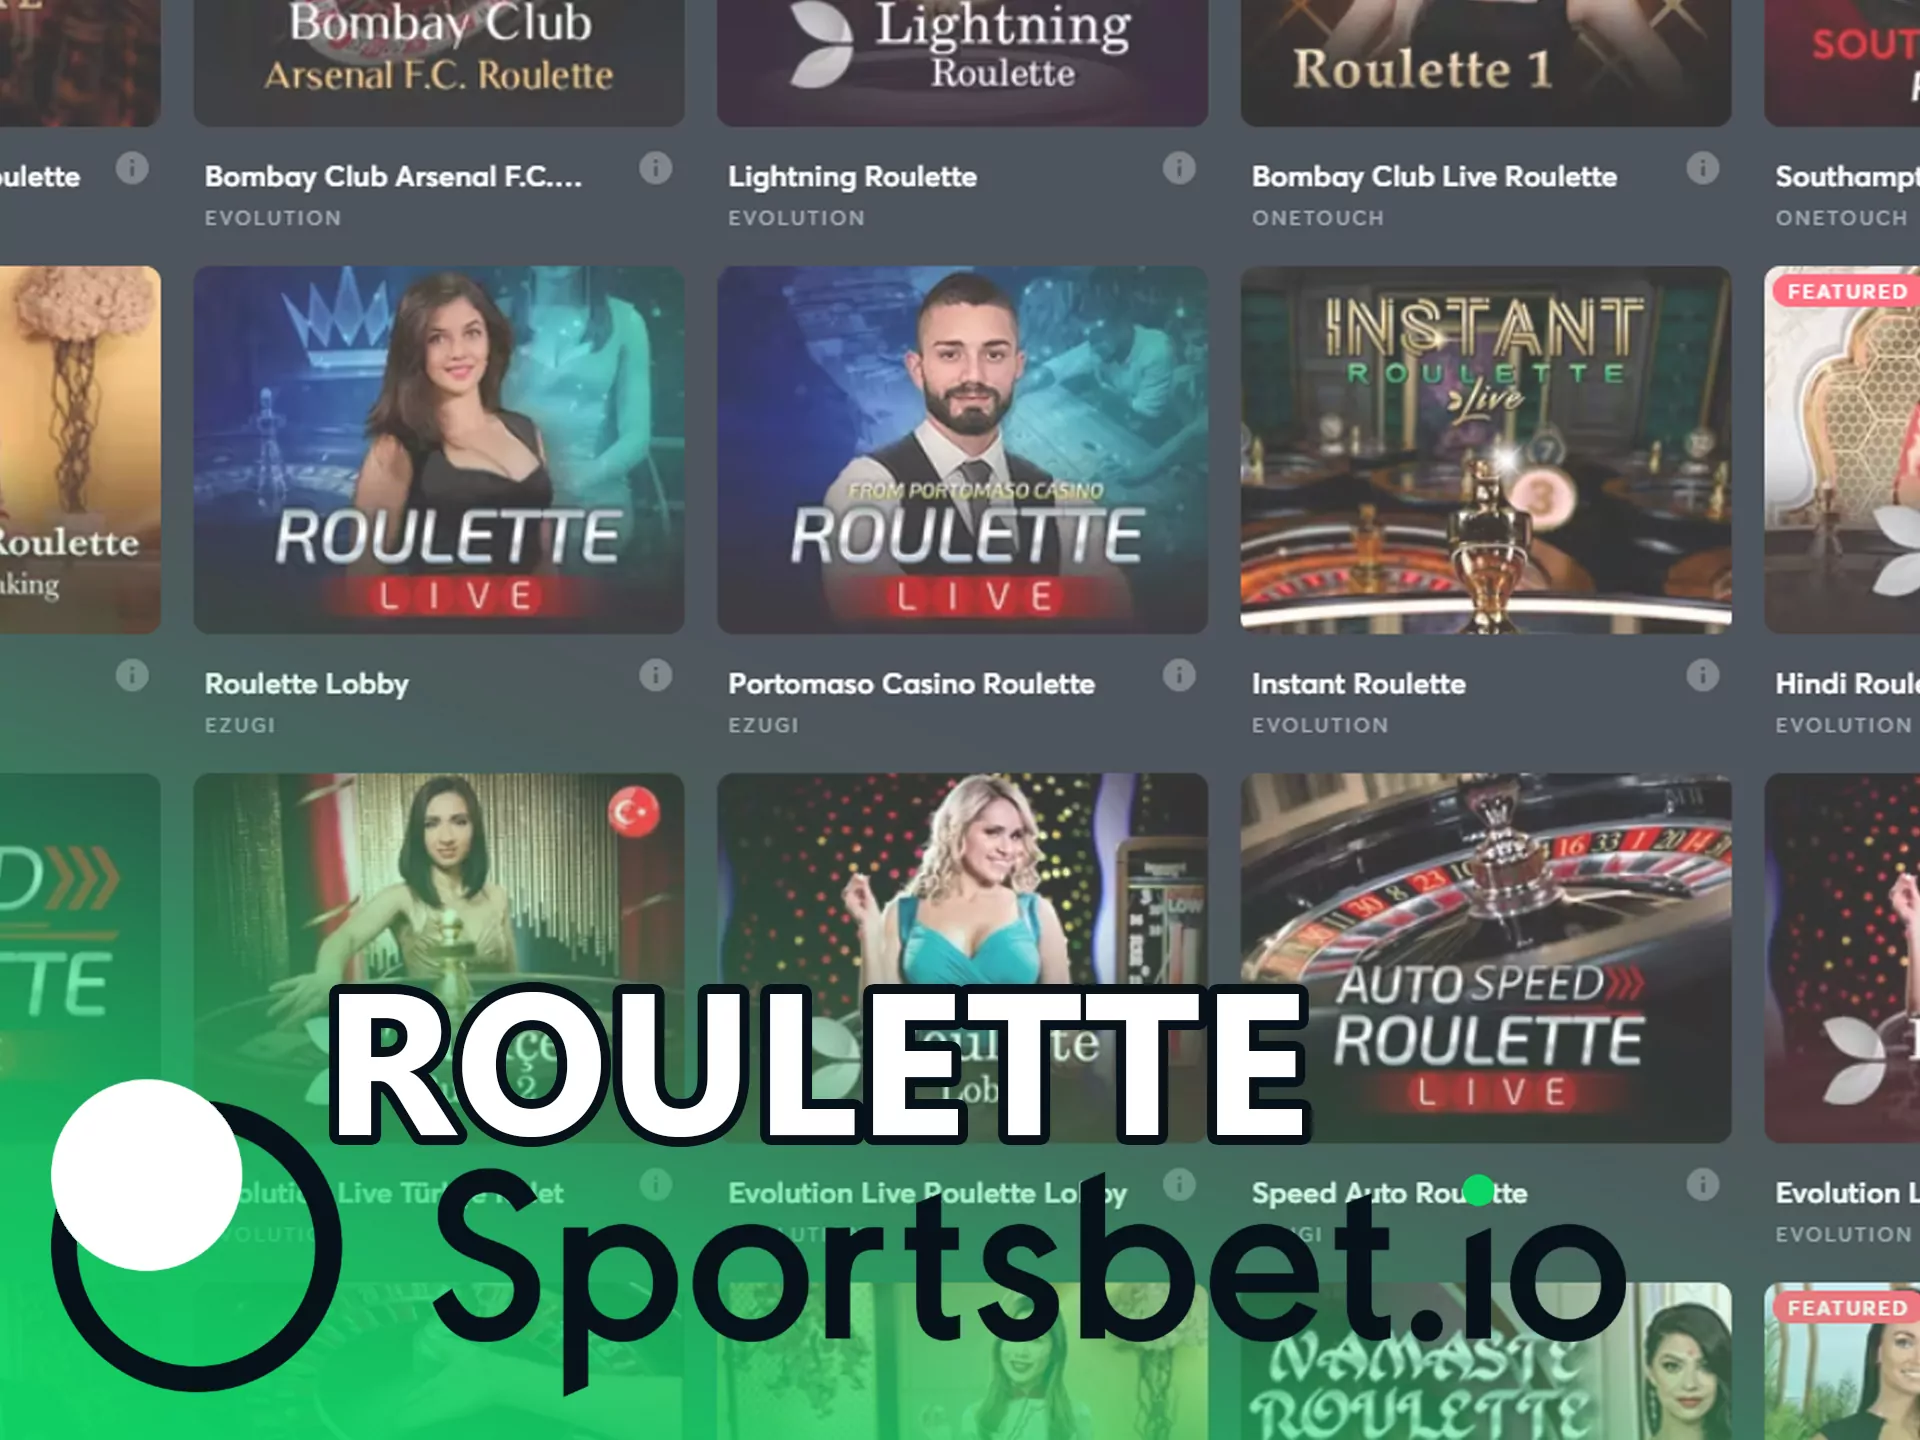 Play different types of roulette at Sportsbet.